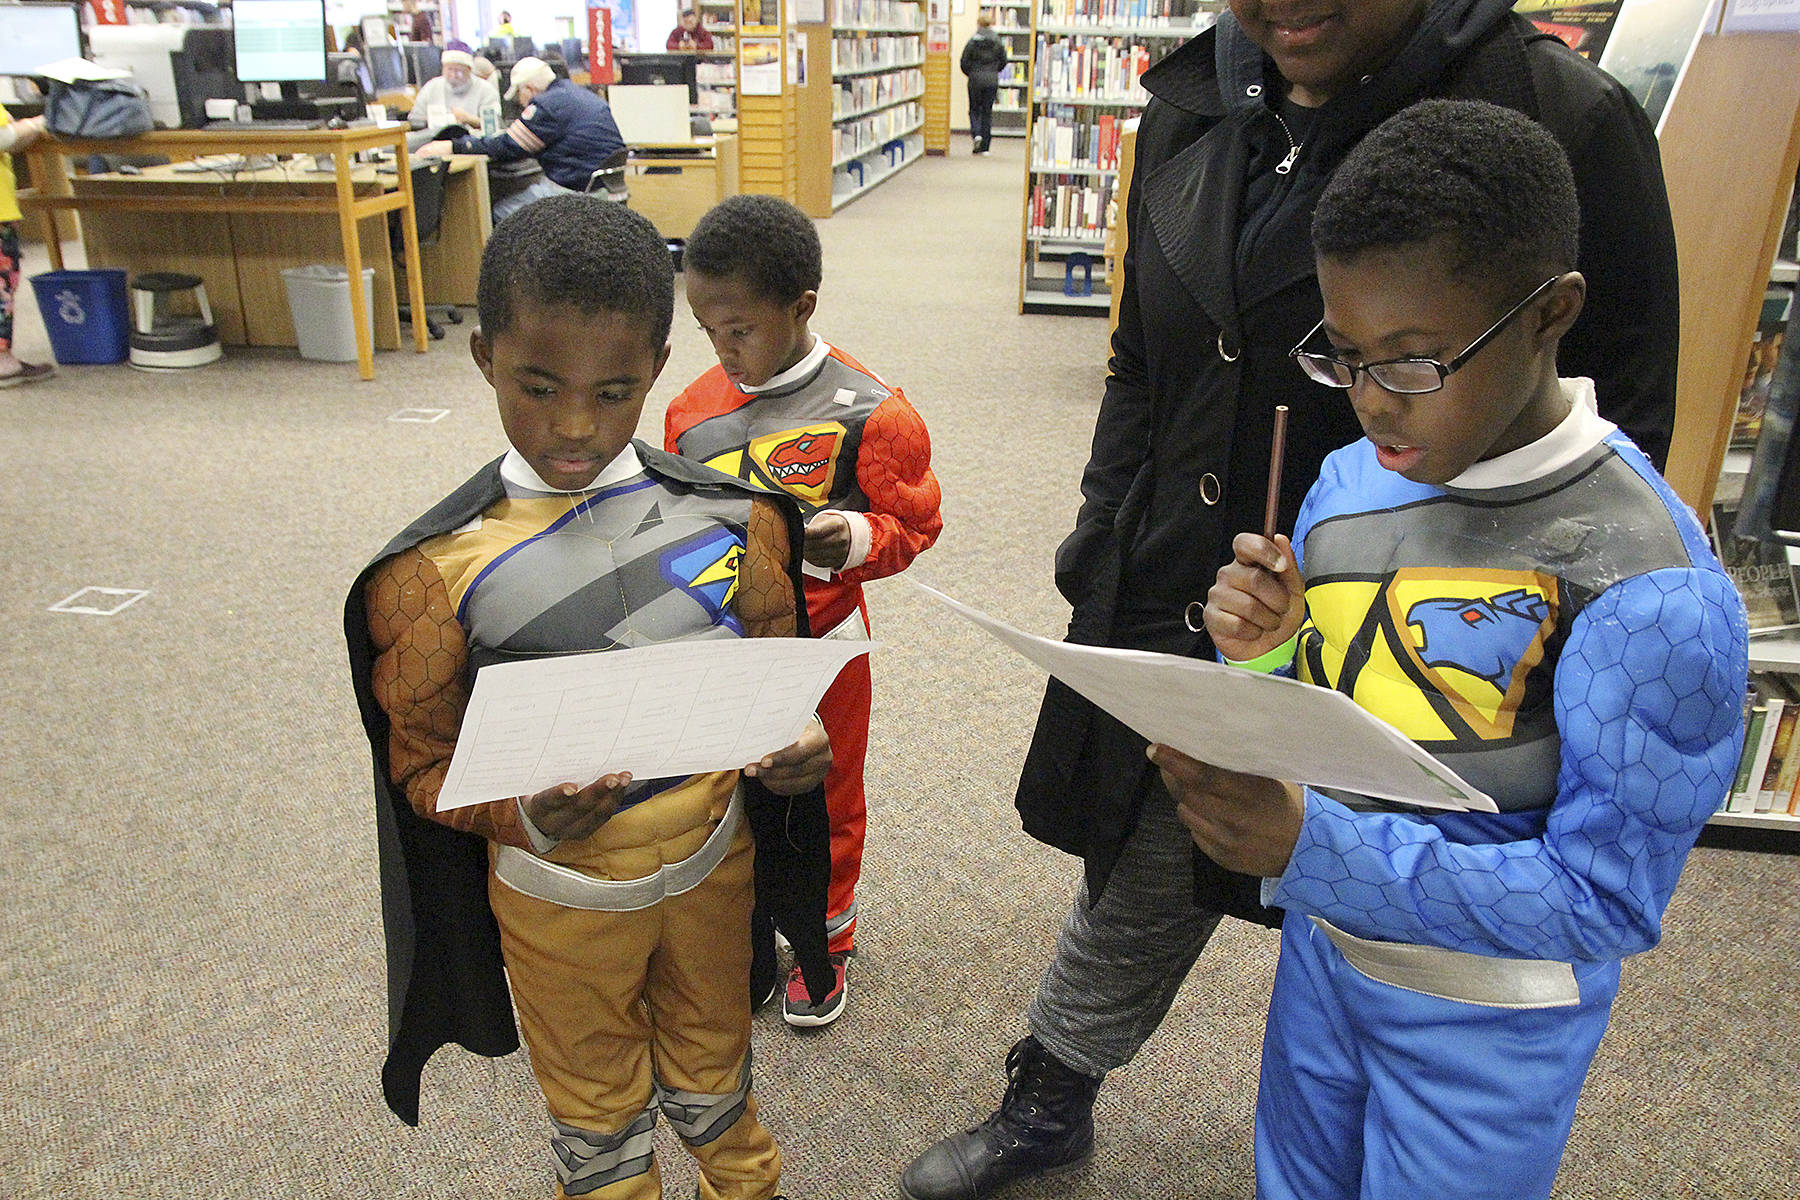 Photo by Laura Guido/Whidbey News-Times.                                Power Rangers Zjahnari Herrera, right, Azjahni Herrera, left, and Zjeziah Herrera, back, work on a scavenger hunt held throughout the Oak Harbor Library Saturday at WhidbeyCon. The free event is in its third year as a family-friendly way for locals to enjoy a comic convention.